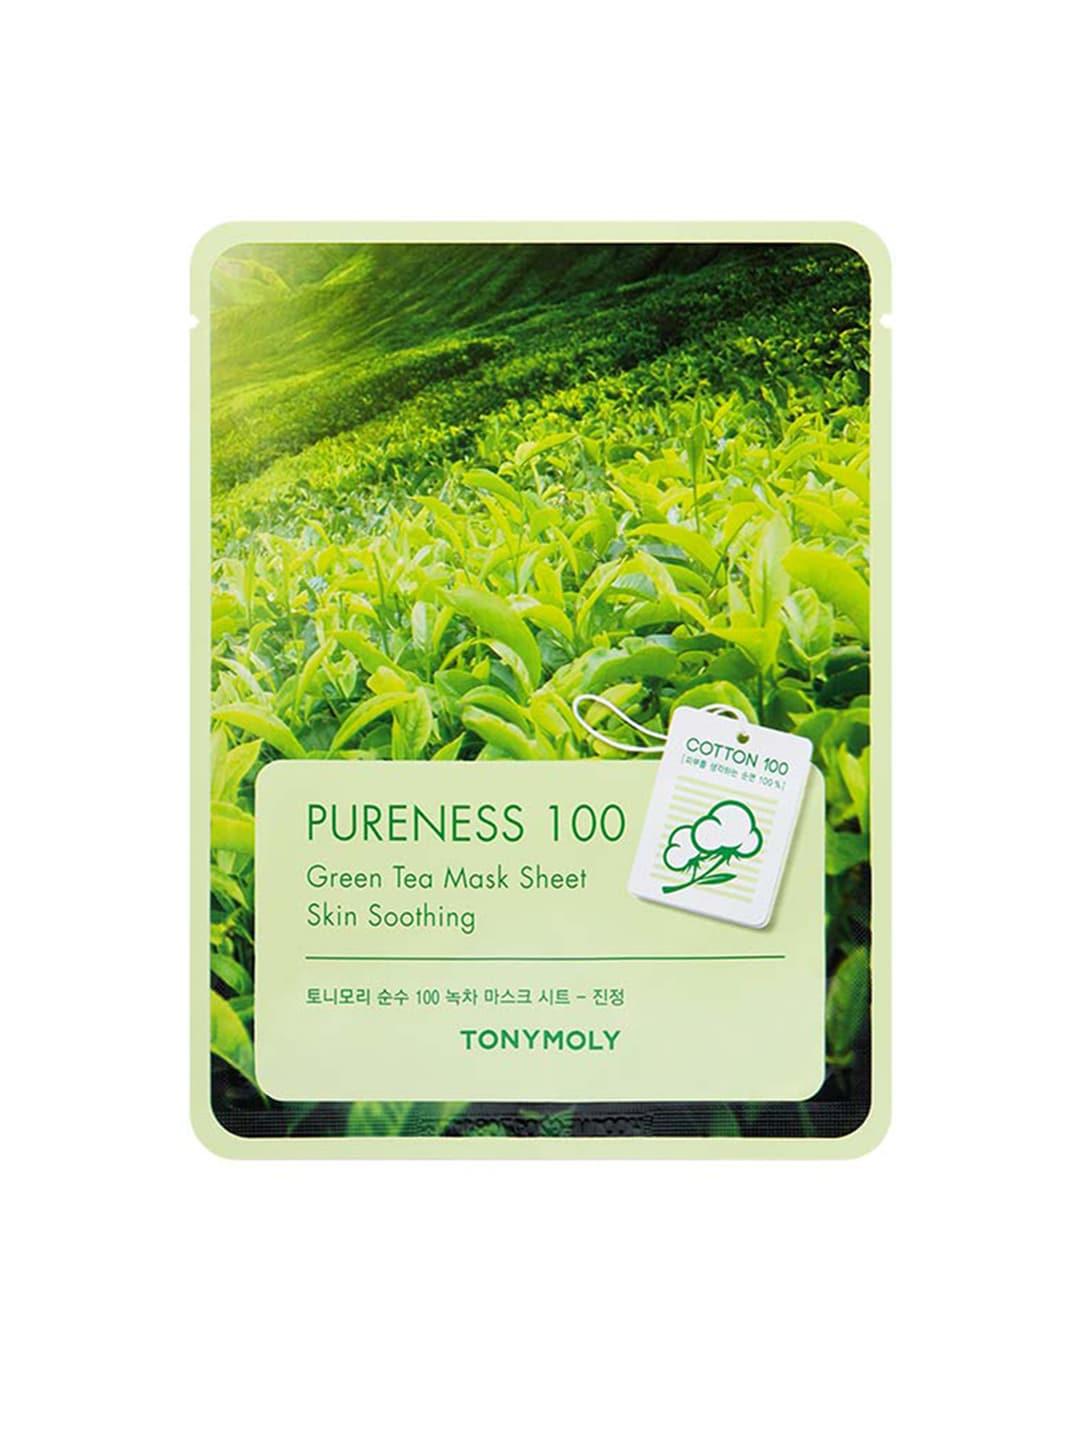 TONYMOLY Pureness 100 Green Tea Mask Sheet for Skin Soothing - 21ml